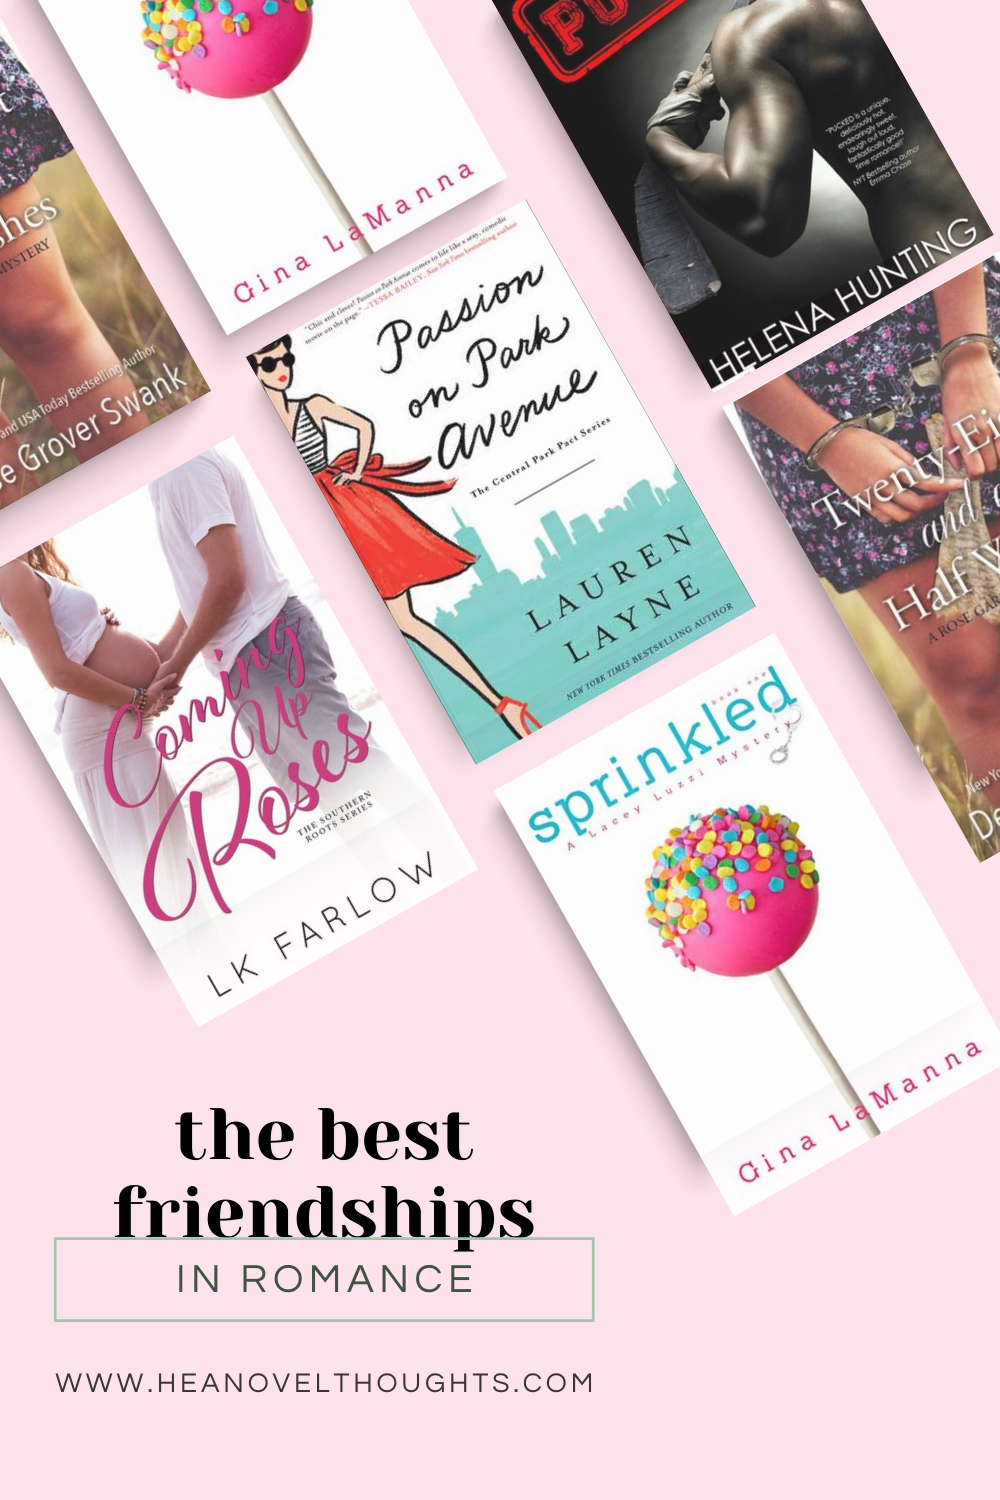 Book Besties: like book boyfriends, but this is my tribe!